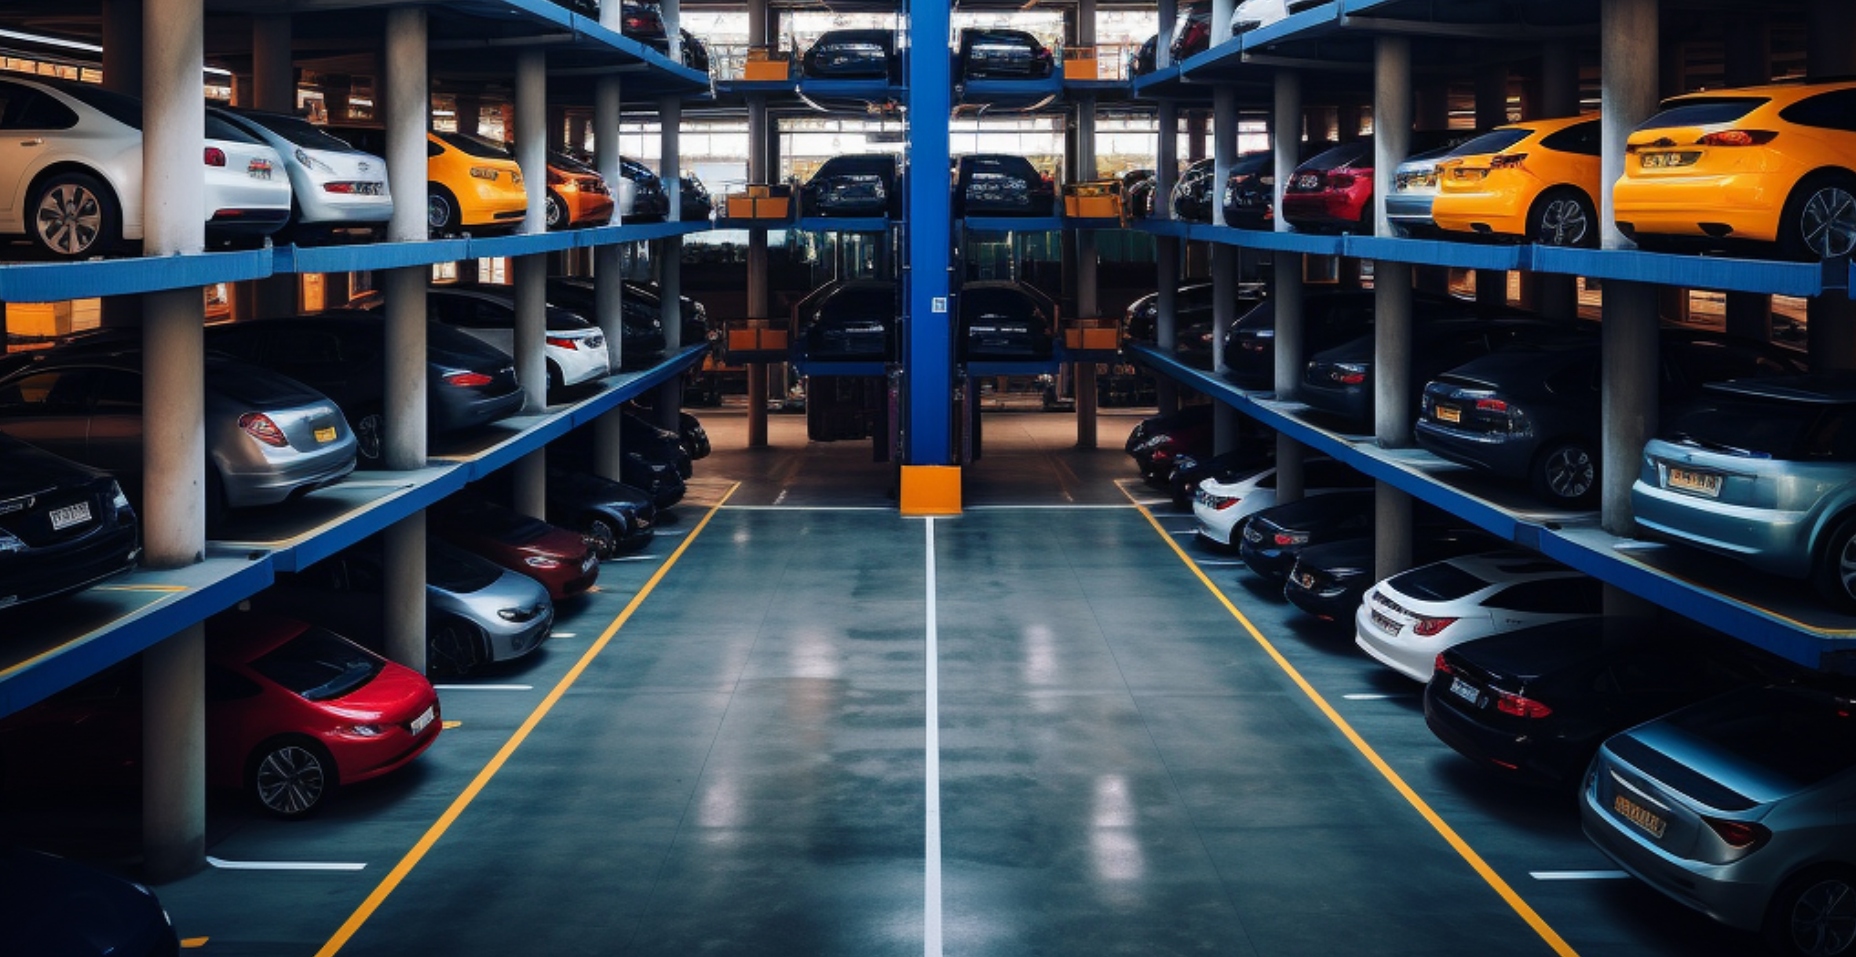 Challenges of Manual Parking and the Growing Need for Automation